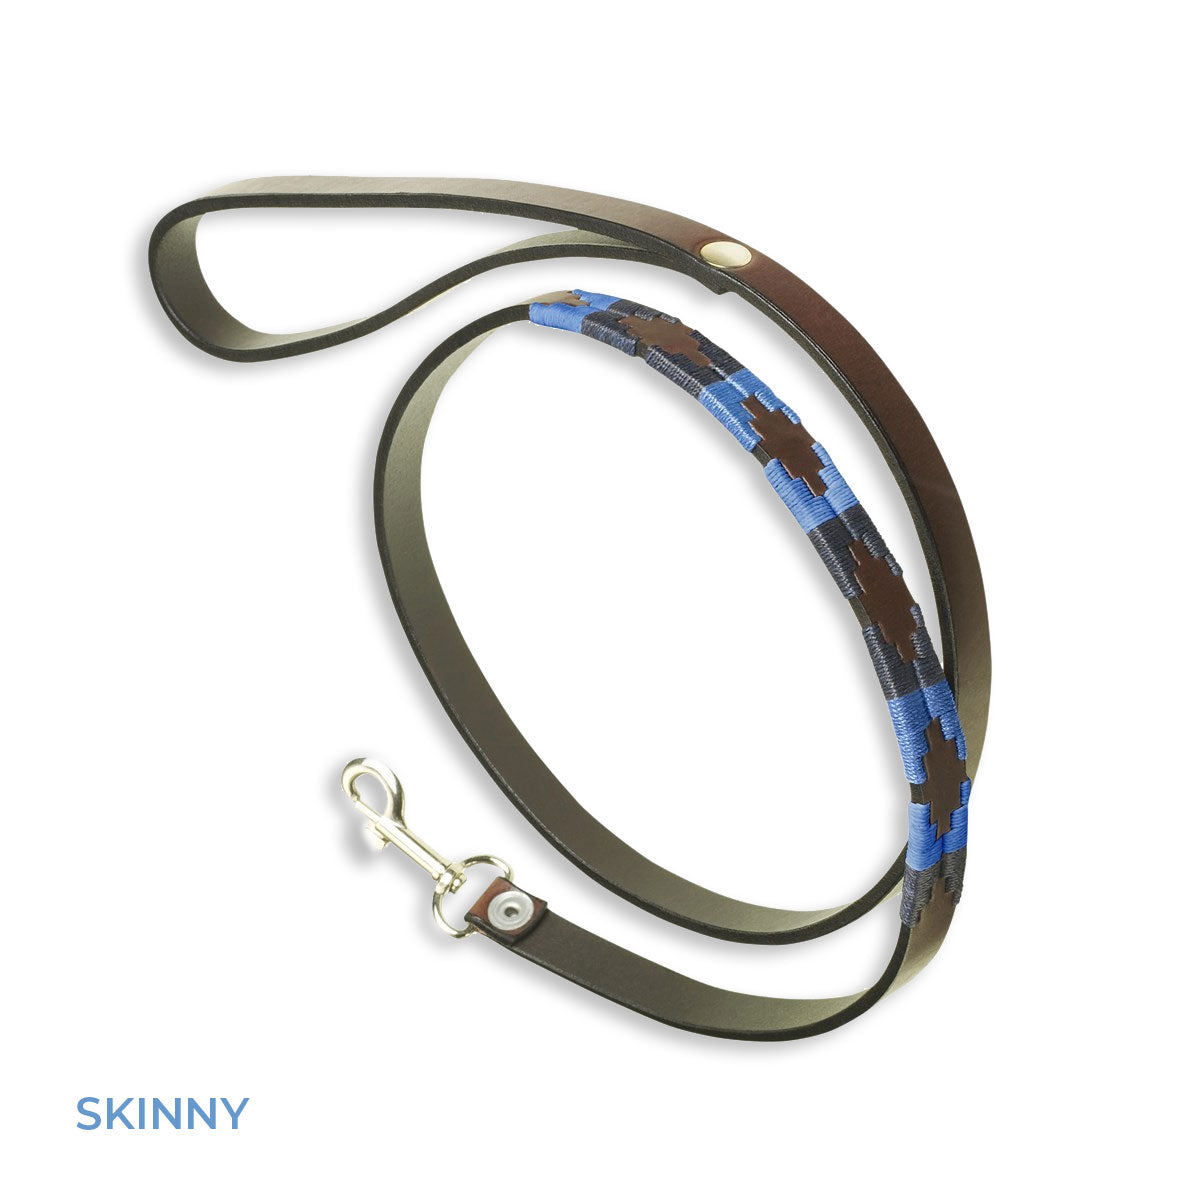 Skinny Pampeano Azules Leather Dog Lead | Sky blue, Navy, Rich Brown Leather